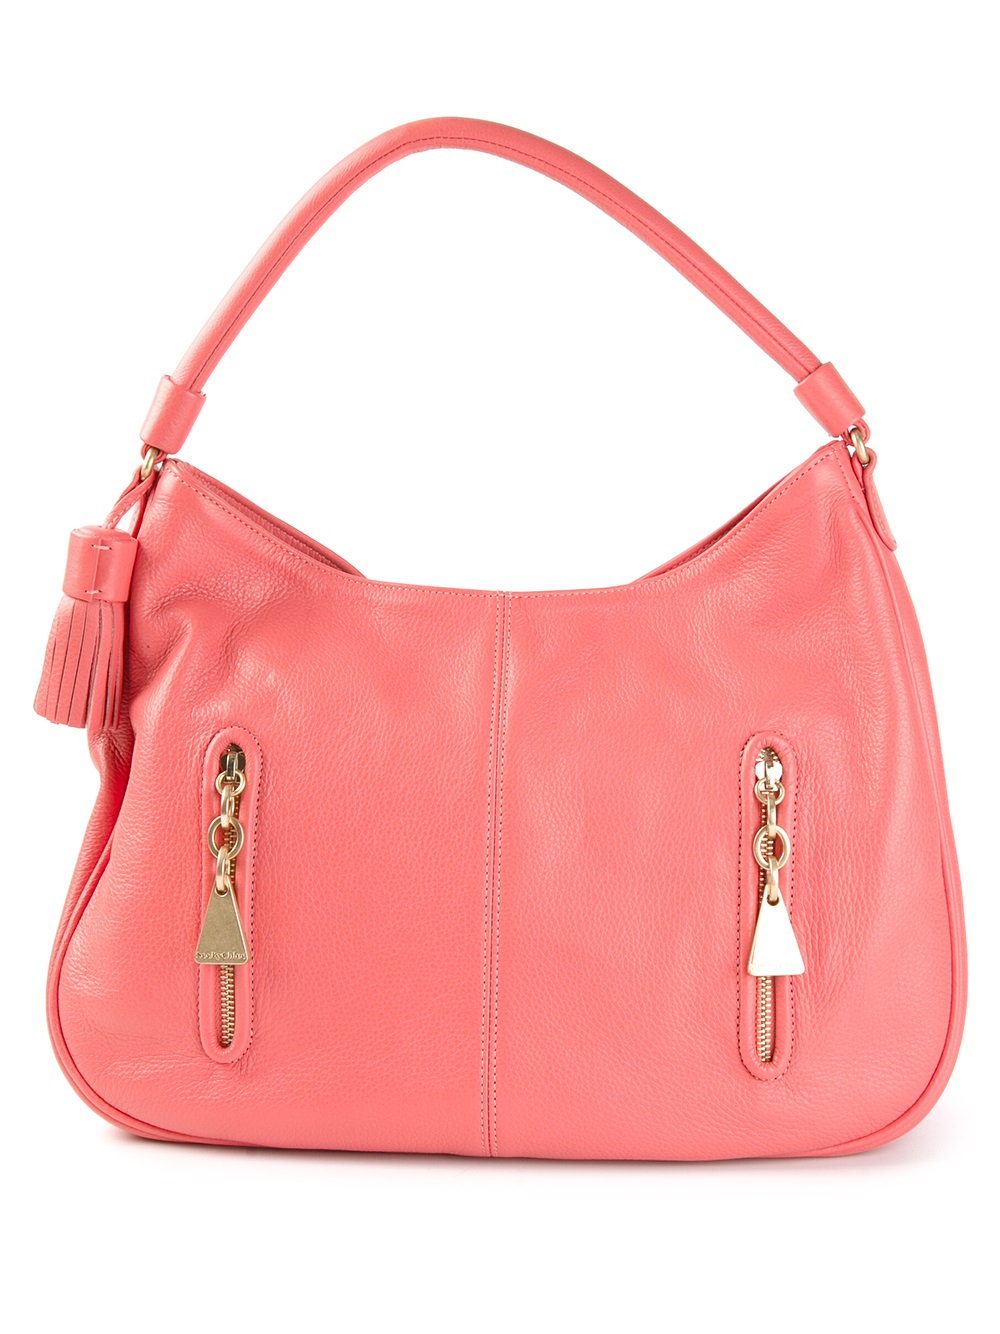 See By Chloé Cherry Hobo Shoulder Bag in Pink & Purple (Pink) - Lyst